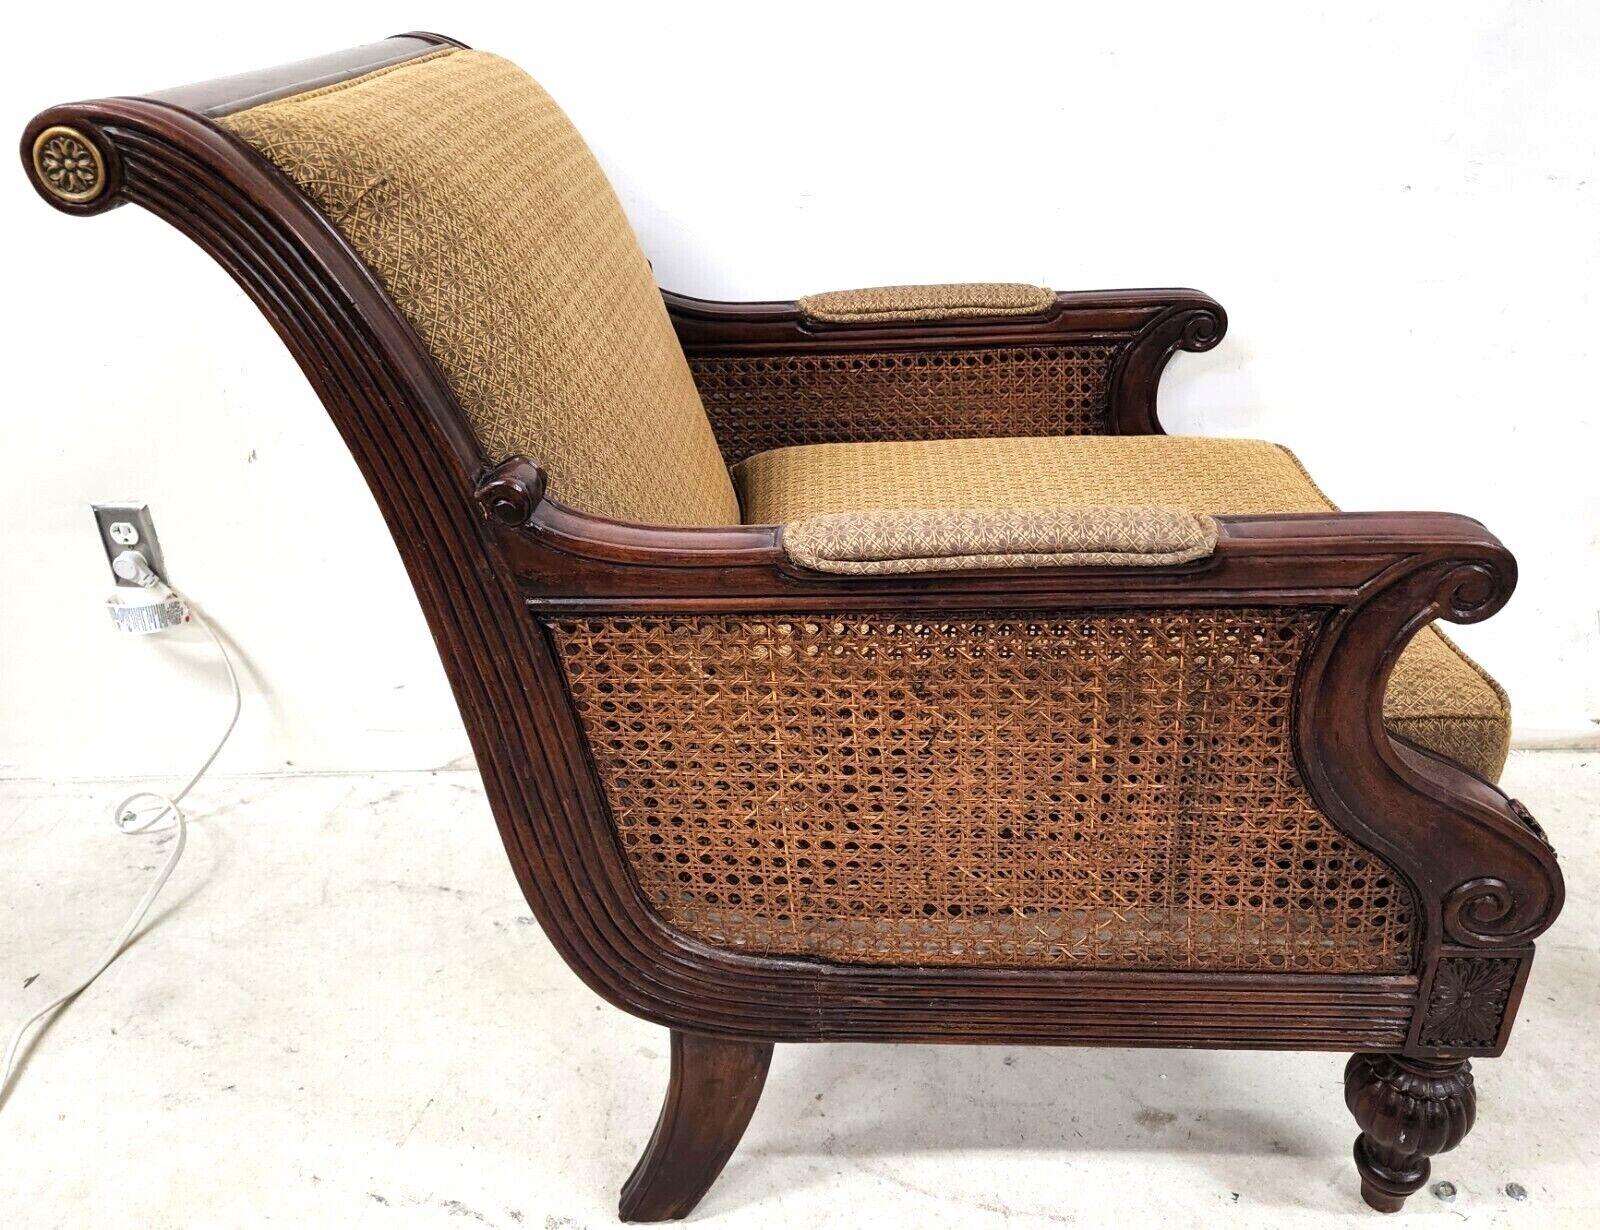 Offering One Of Our Recent Palm Beach Estate Fine Furniture Acquisitions Of A 
Vintage Double Caned Lounge Club Chair by SCHNADIG

Approximate Measurements in Inches
36